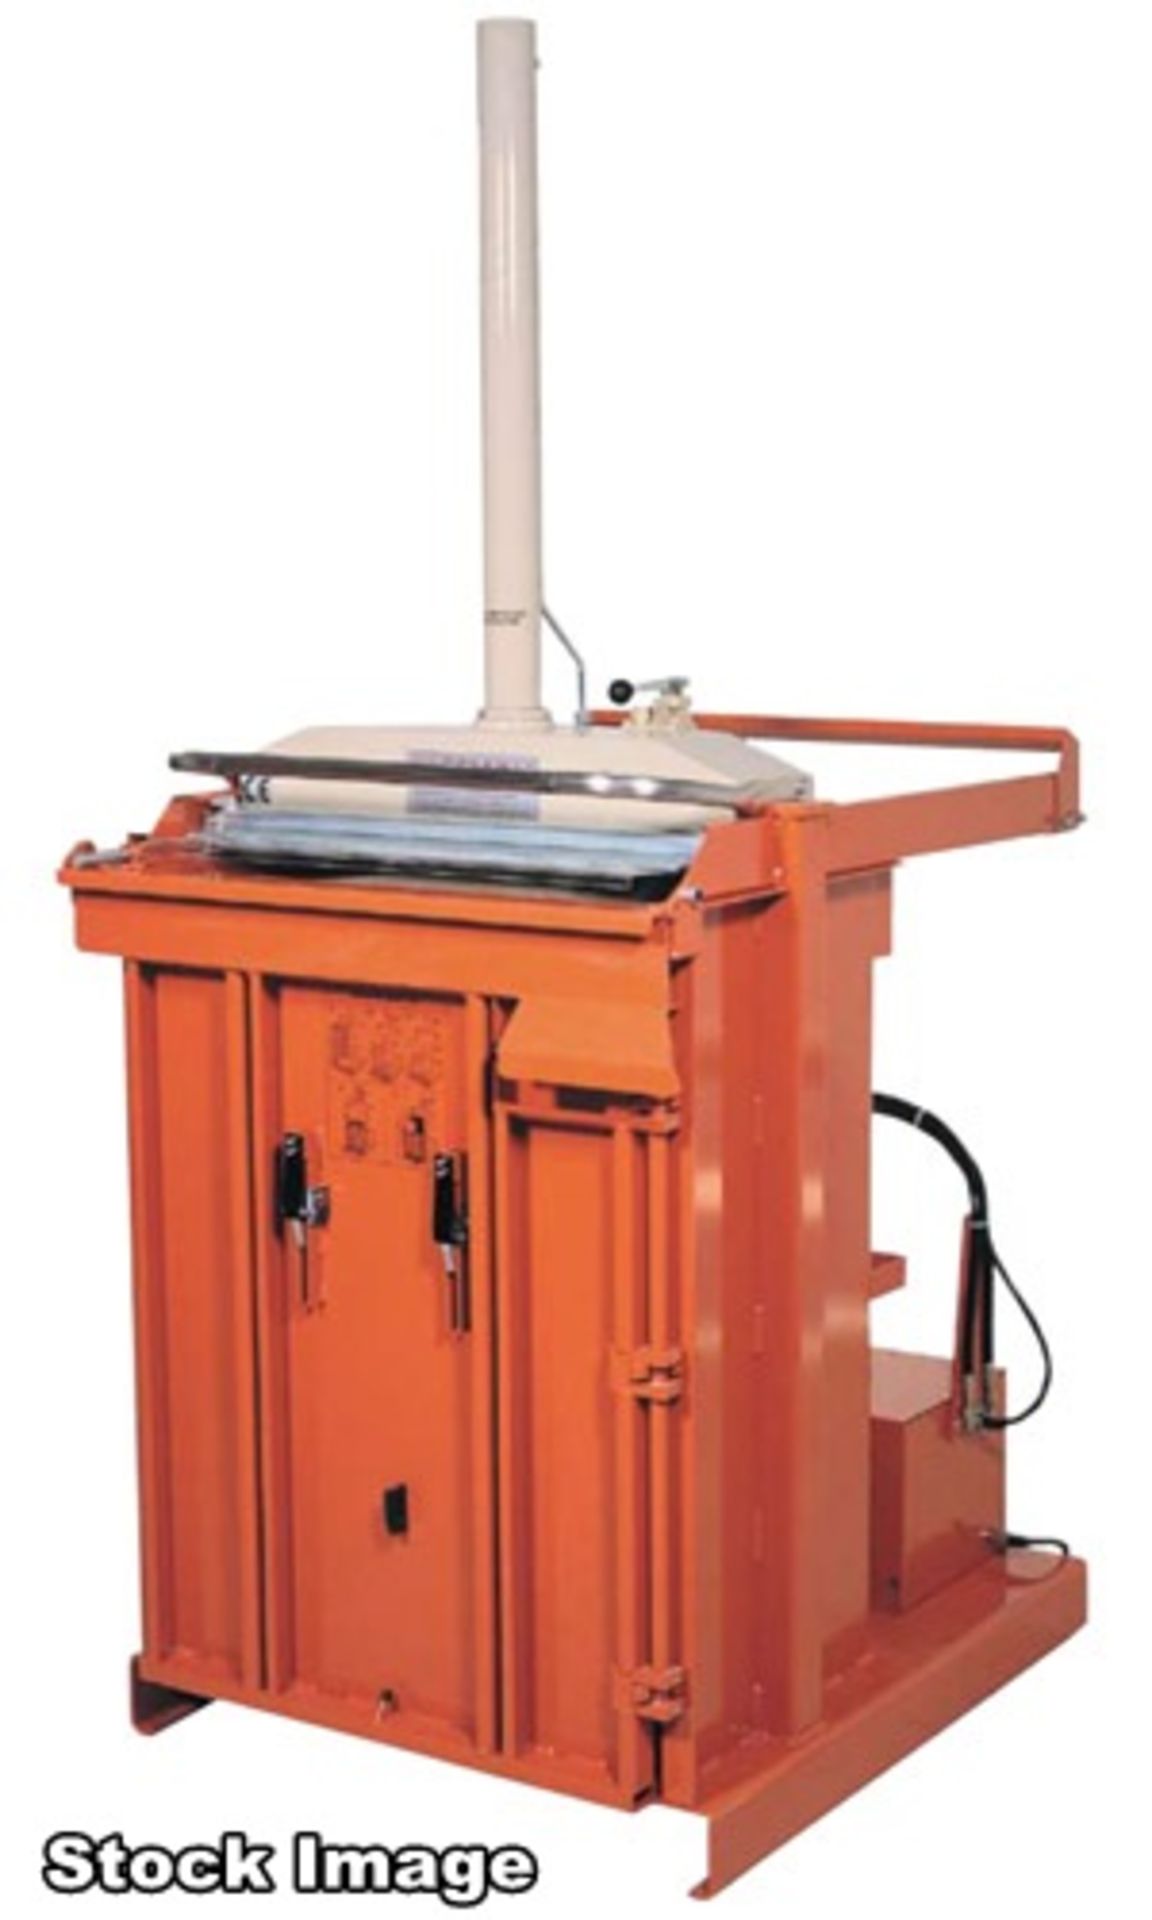 1 x Orwak 5010E Hydaulic Press Compact Baler - Used For Compacting Recyclable or Non-Recyclable